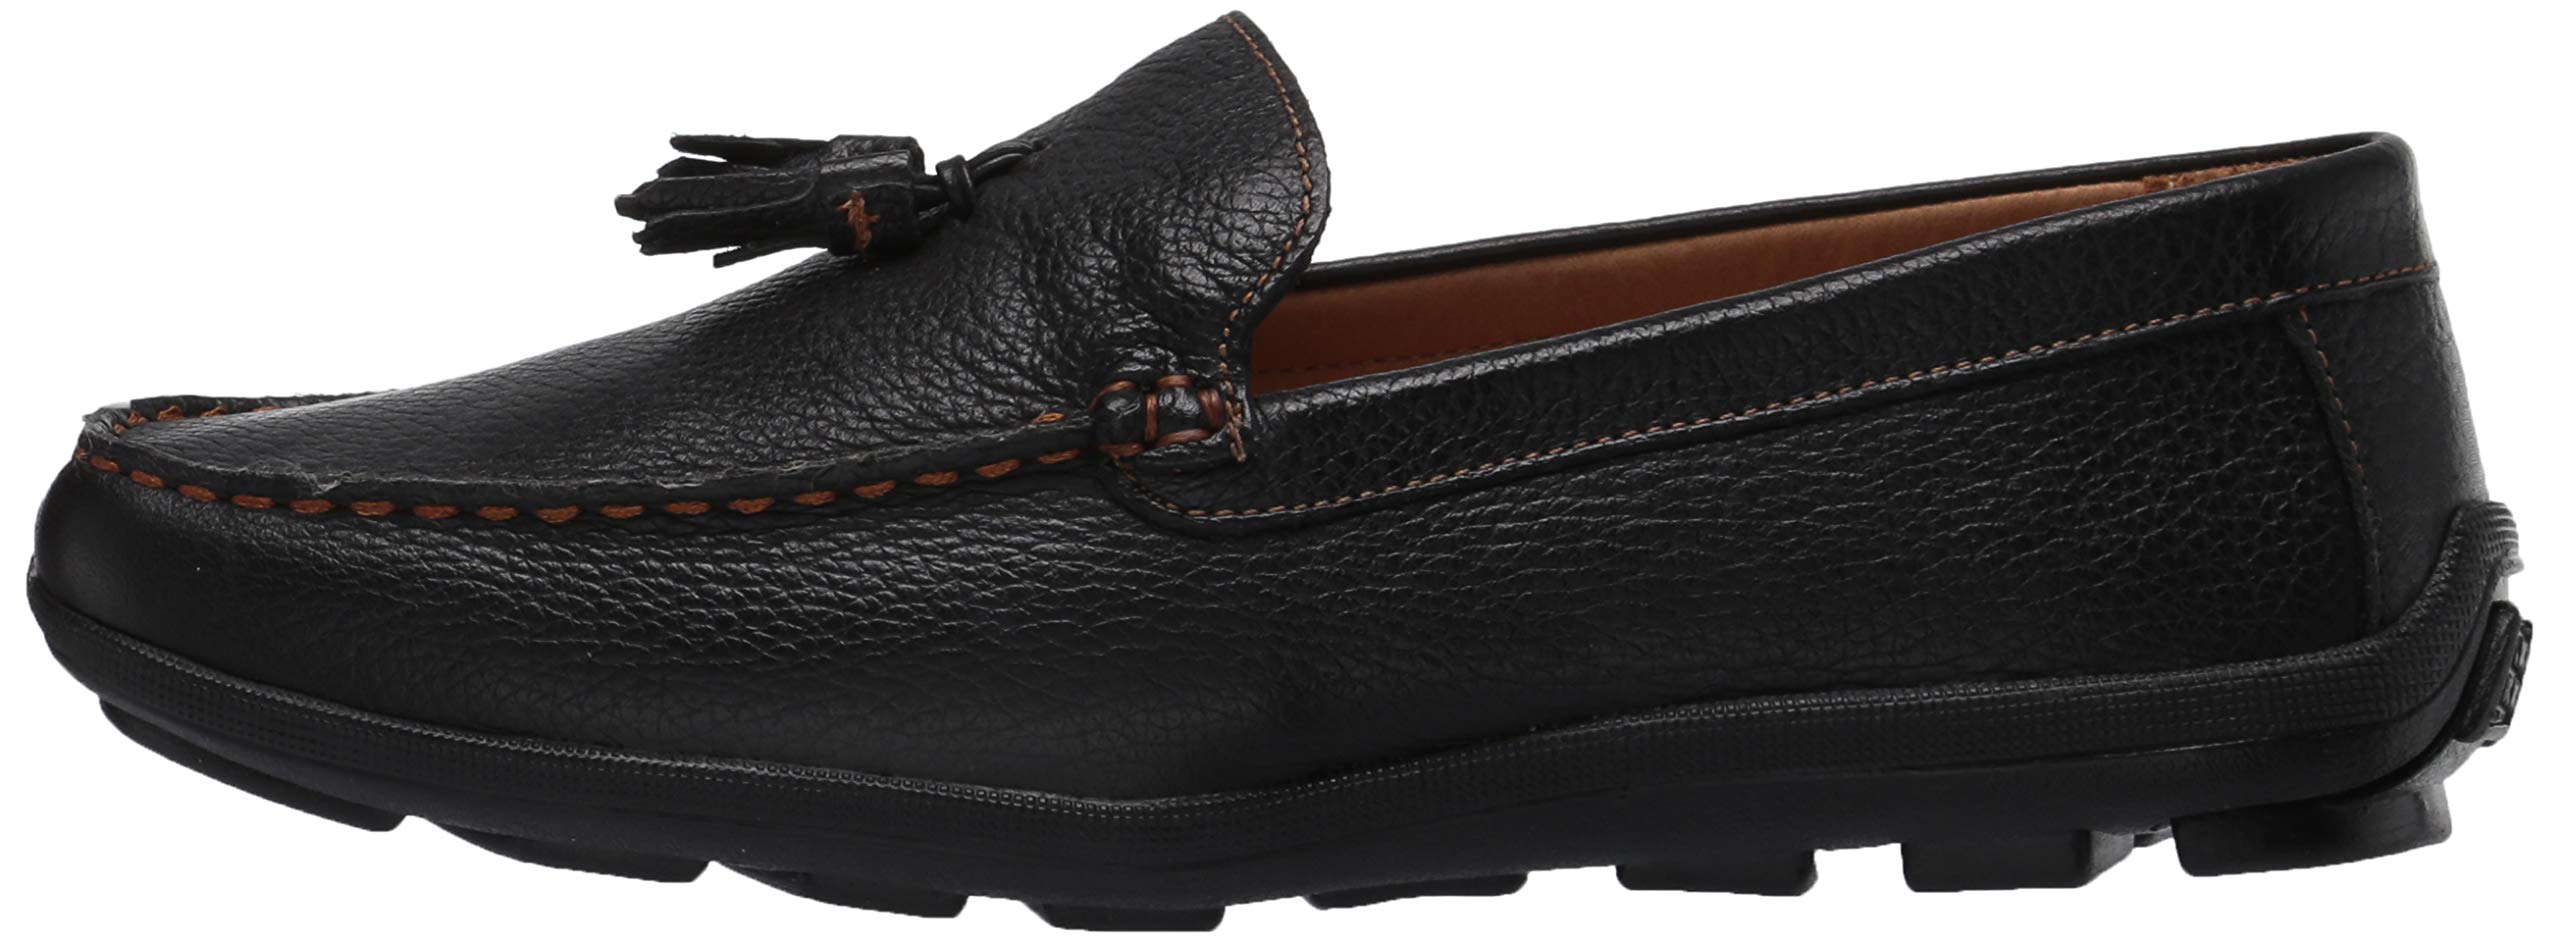 Driver Club USA Unisex-Child Kids Boys/Girls Leather Driving Loafer with Tassle Detail